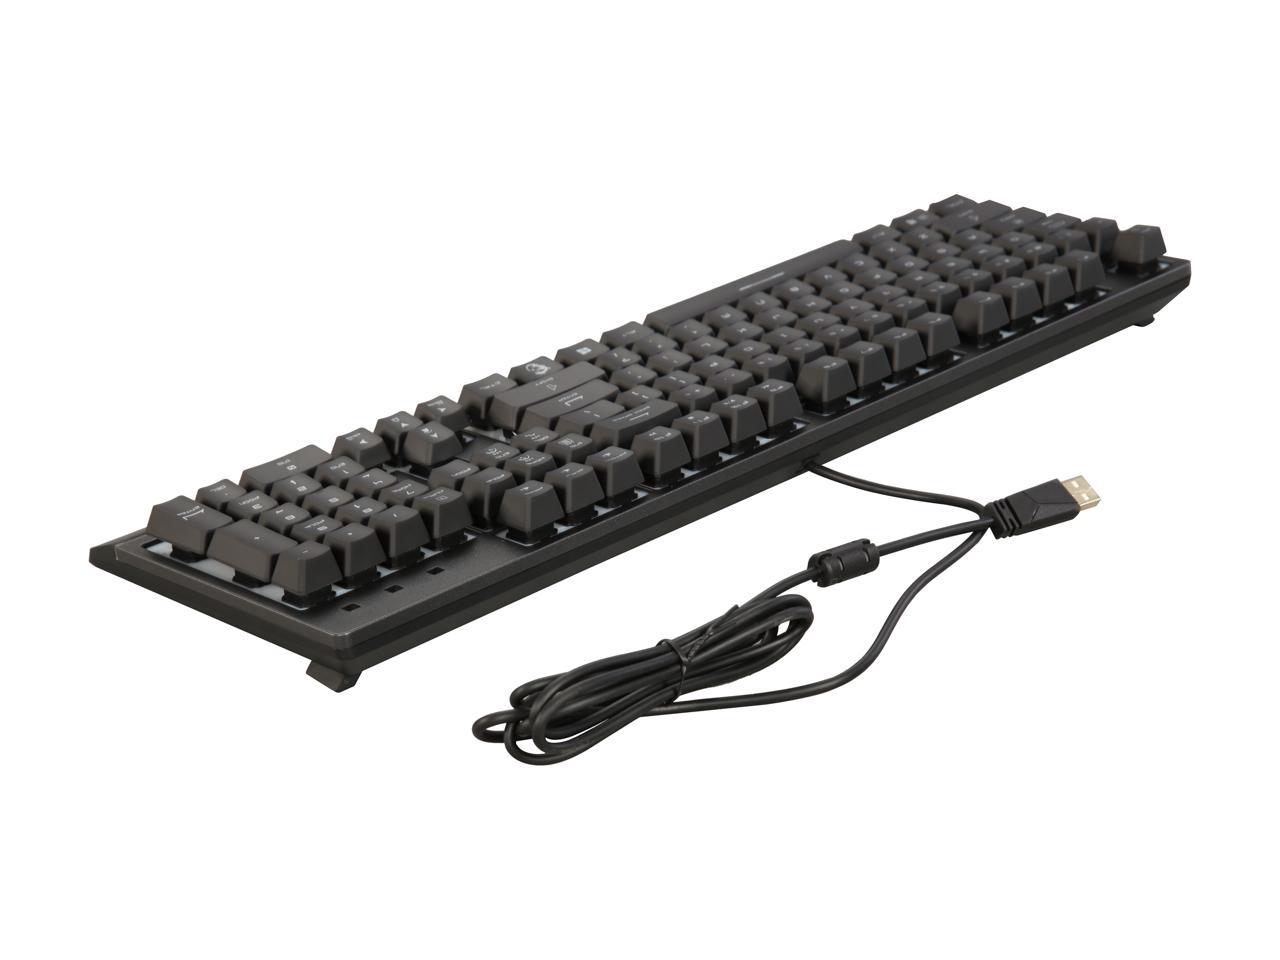 MSI Vigor GK30 USB Wired Gaming Keyboard with RGB Backlight and Water Repellent